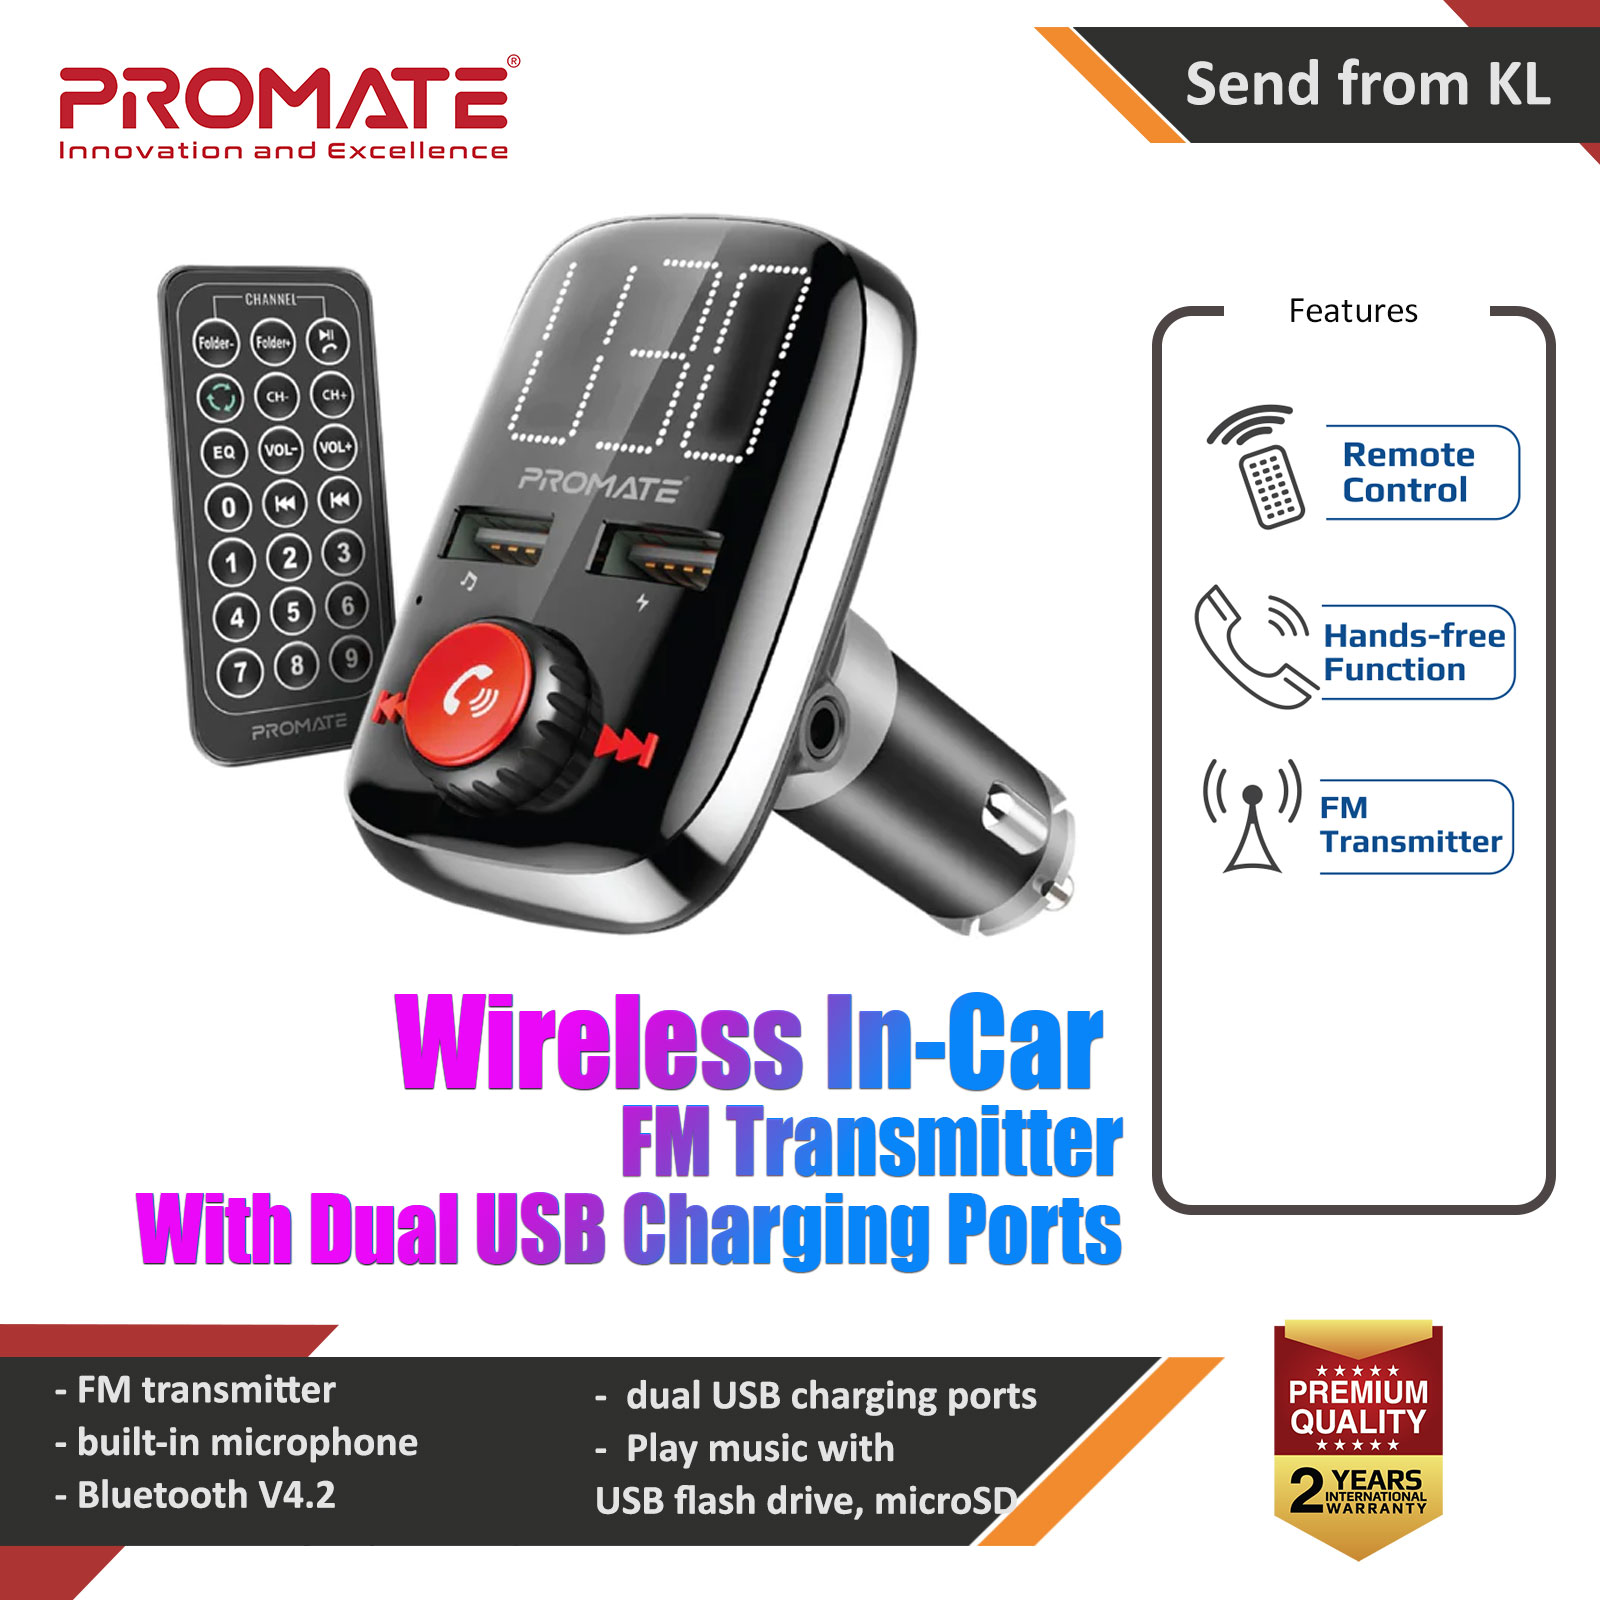 Picture of Promate Wireless FM Transmitter In-Car Bluetooth V4.2 FM Transmitter Car Kit with Smart LED Display 3.4A Dual USB Port Car Charger AUX Input Micro-SD Card Slot Remote Control and Hands-Free Calling for Smartphones Tablet MP3 - SmarTune-3 Red Design- Red Design Cases, Red Design Covers, iPad Cases and a wide selection of Red Design Accessories in Malaysia, Sabah, Sarawak and Singapore 